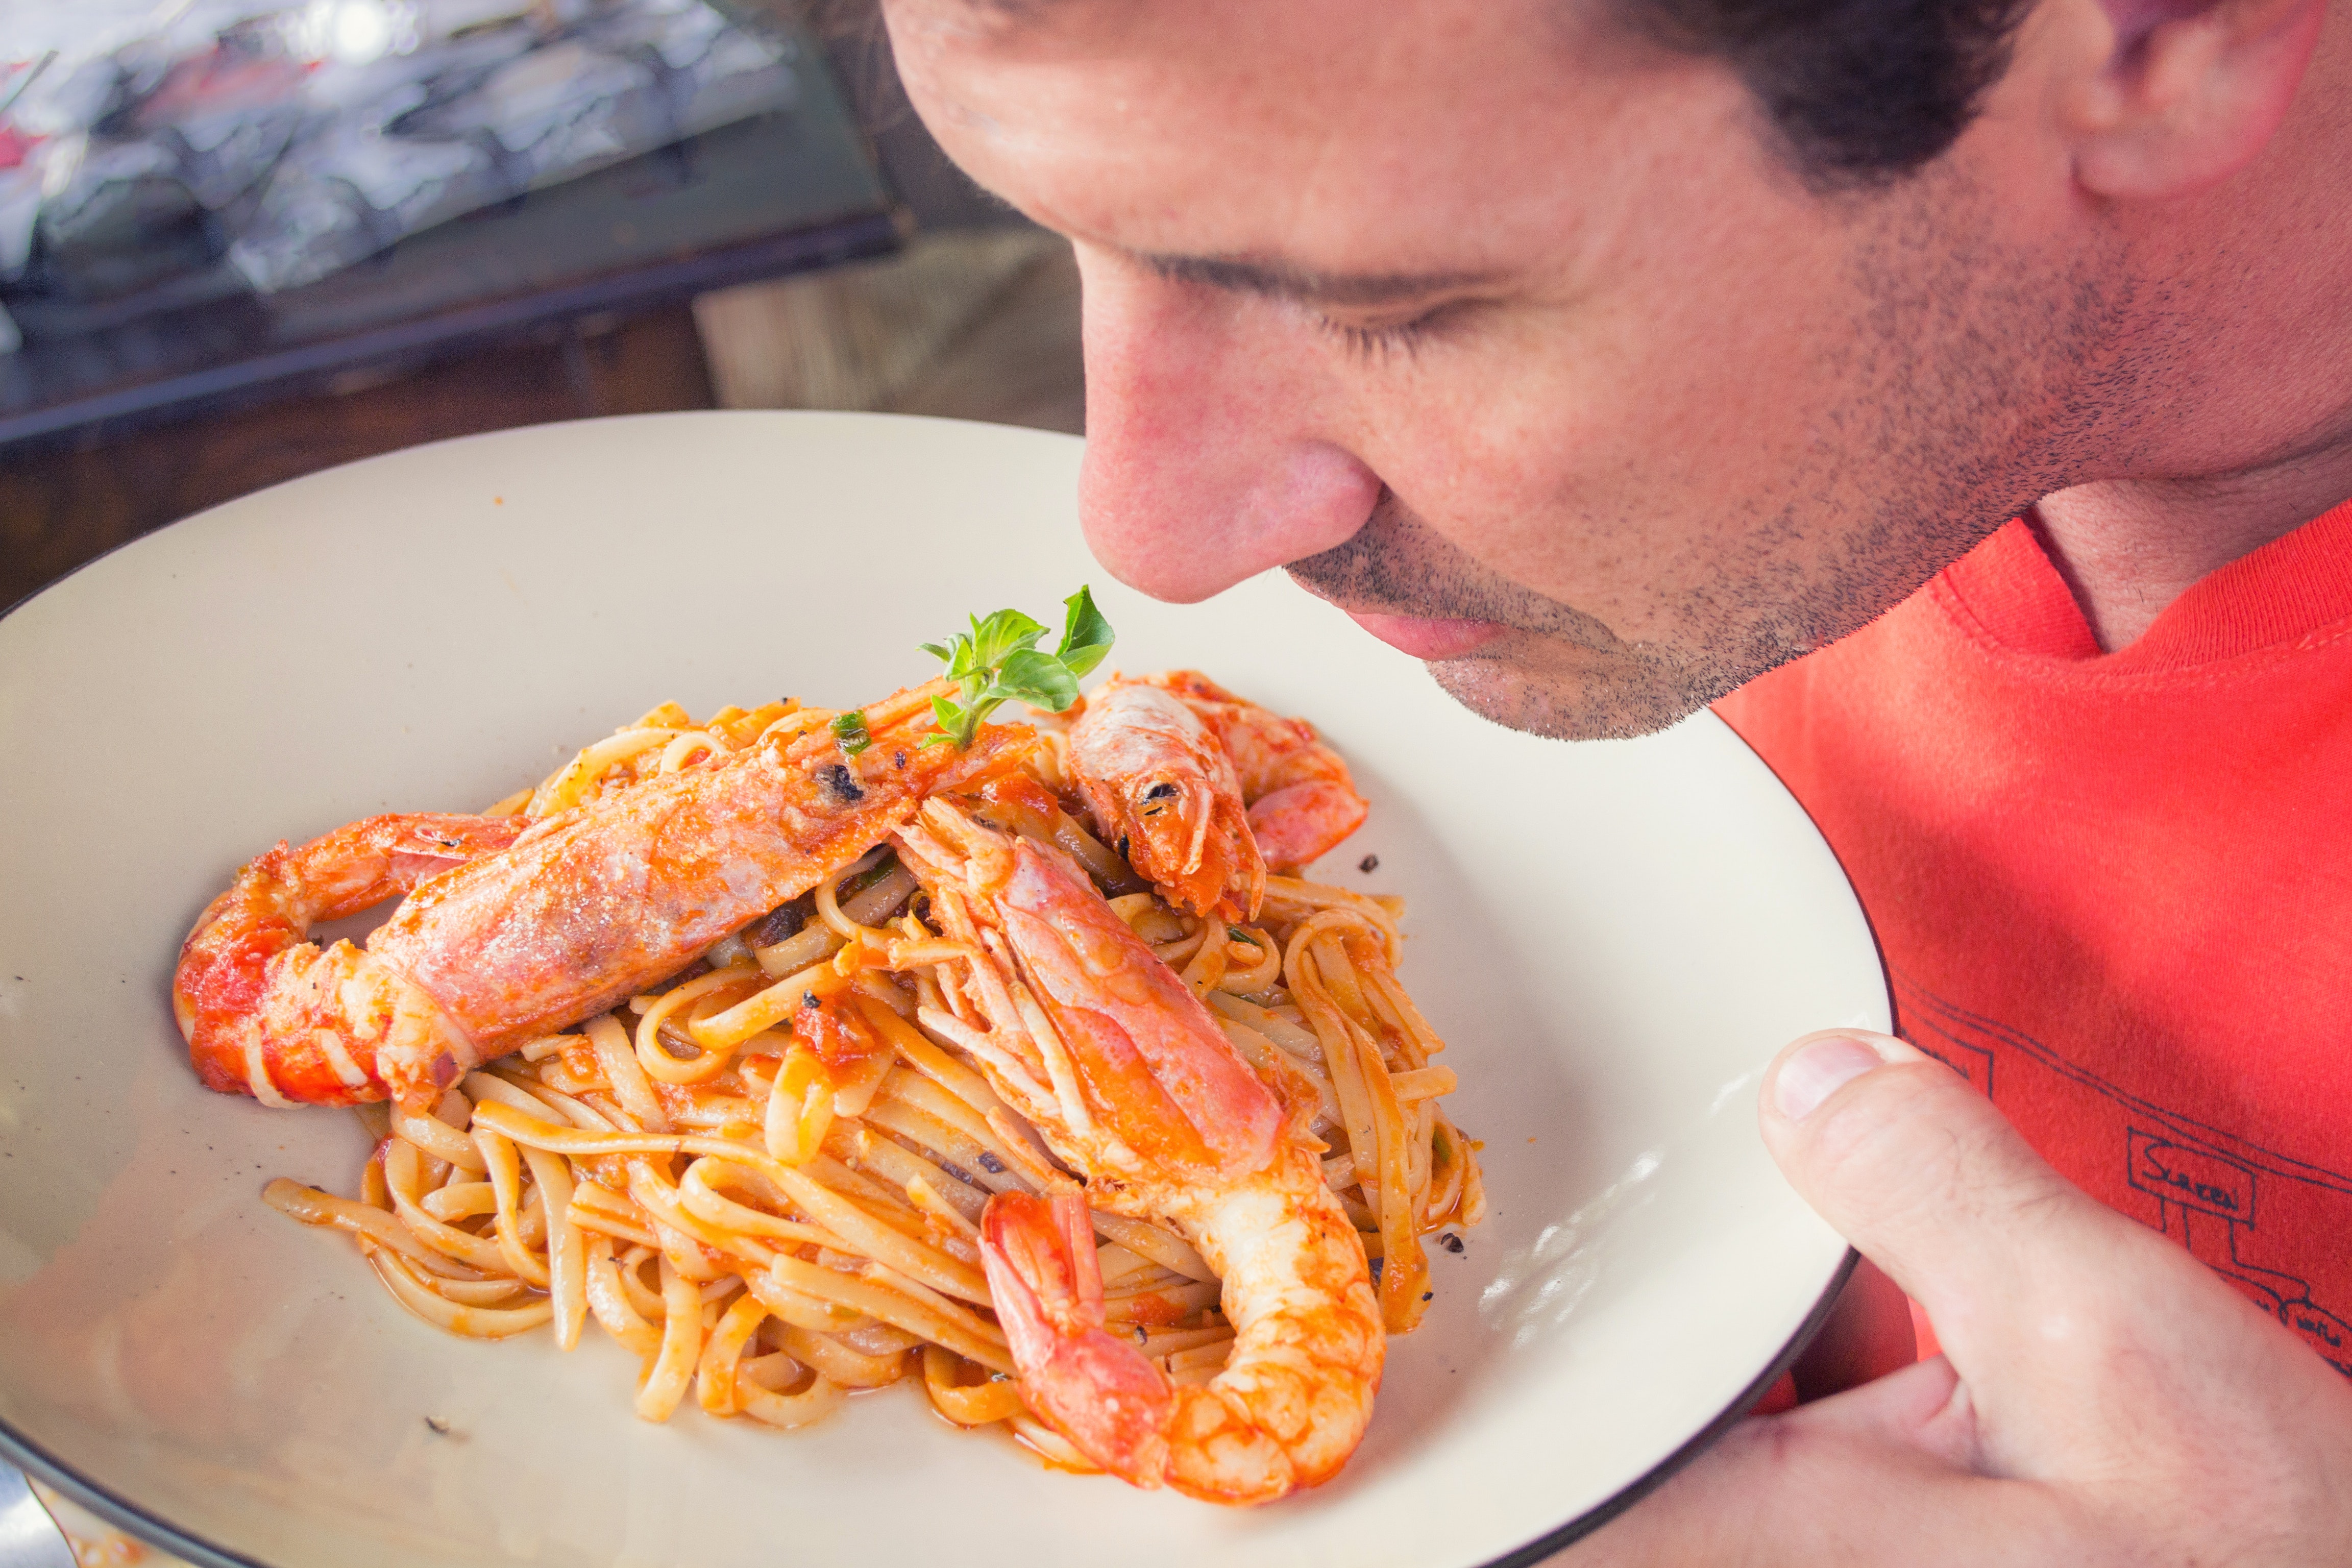 Man Smelling Prawn and Pasta Dish on White Ceramic Plate, Meal, Spaghetti, Smelling, Shrimps, HQ Photo